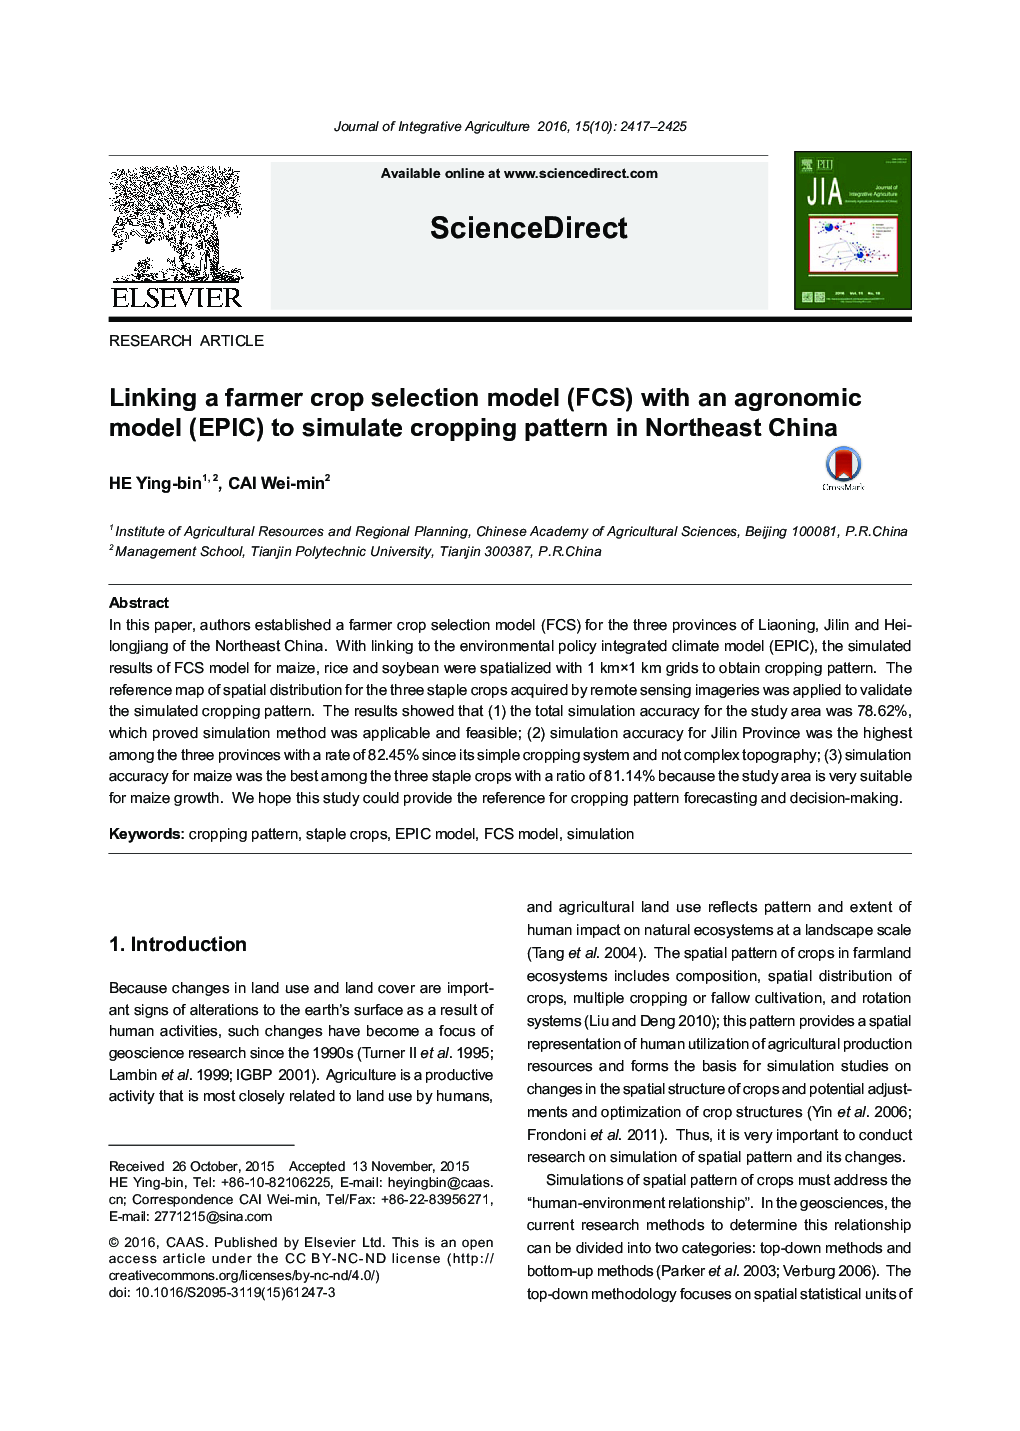 Linking a farmer crop selection model (FCS) with an agronomic model (EPIC) to simulate cropping pattern in Northeast China